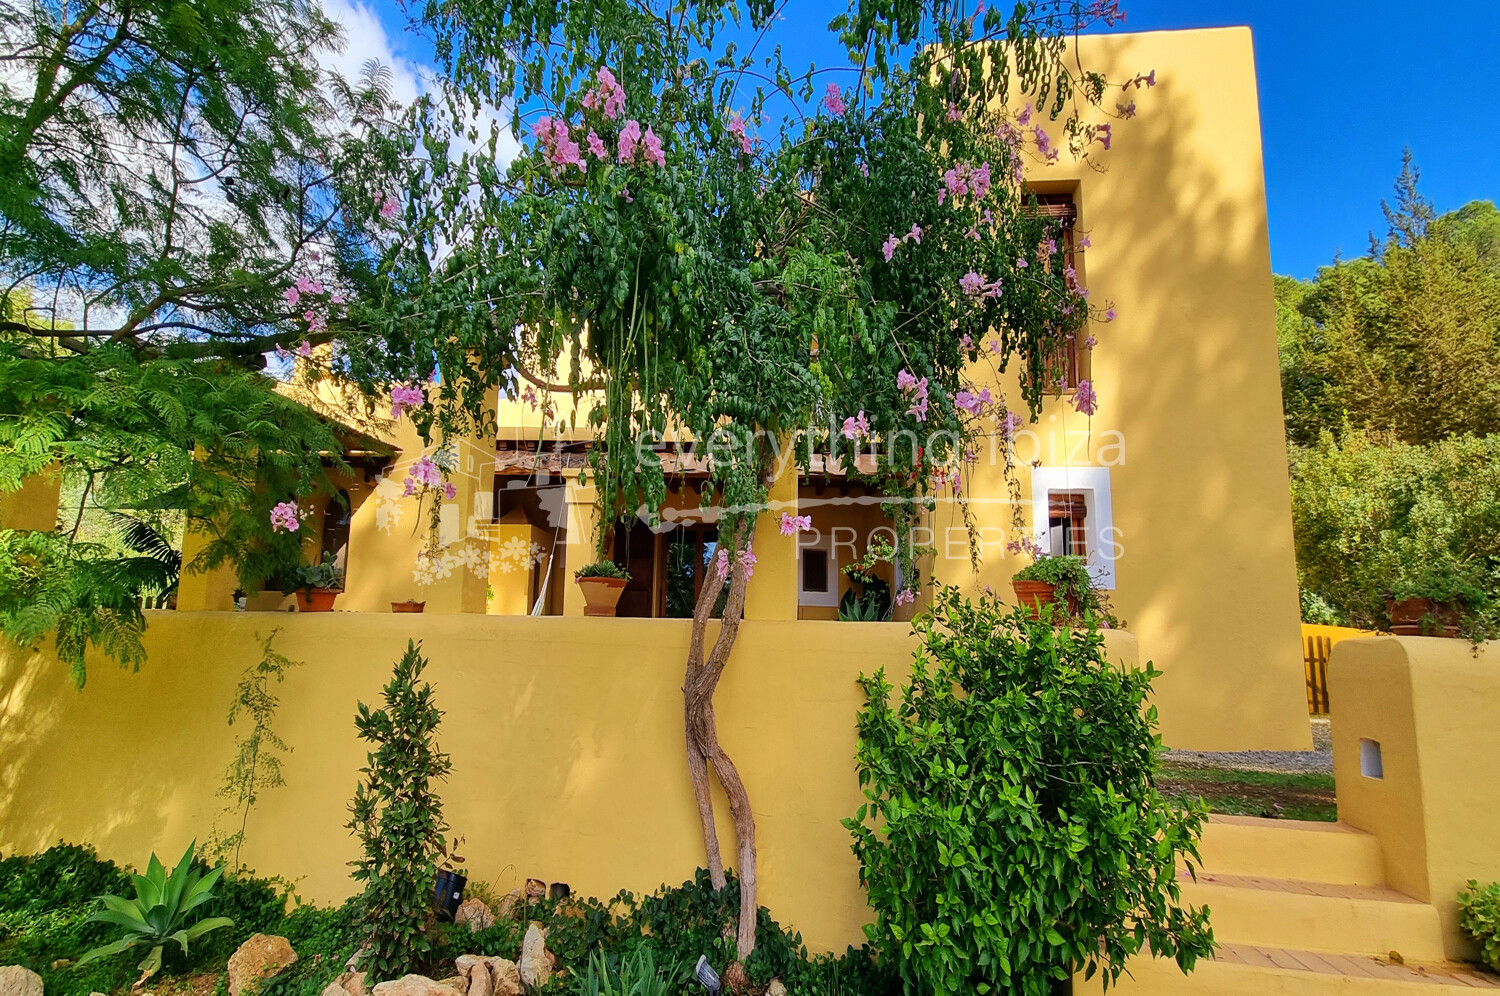 Beautiful Traditional Country Finca with Full Tourist License, ref. 1536, for sale in Ibiza by everything ibiza Properties